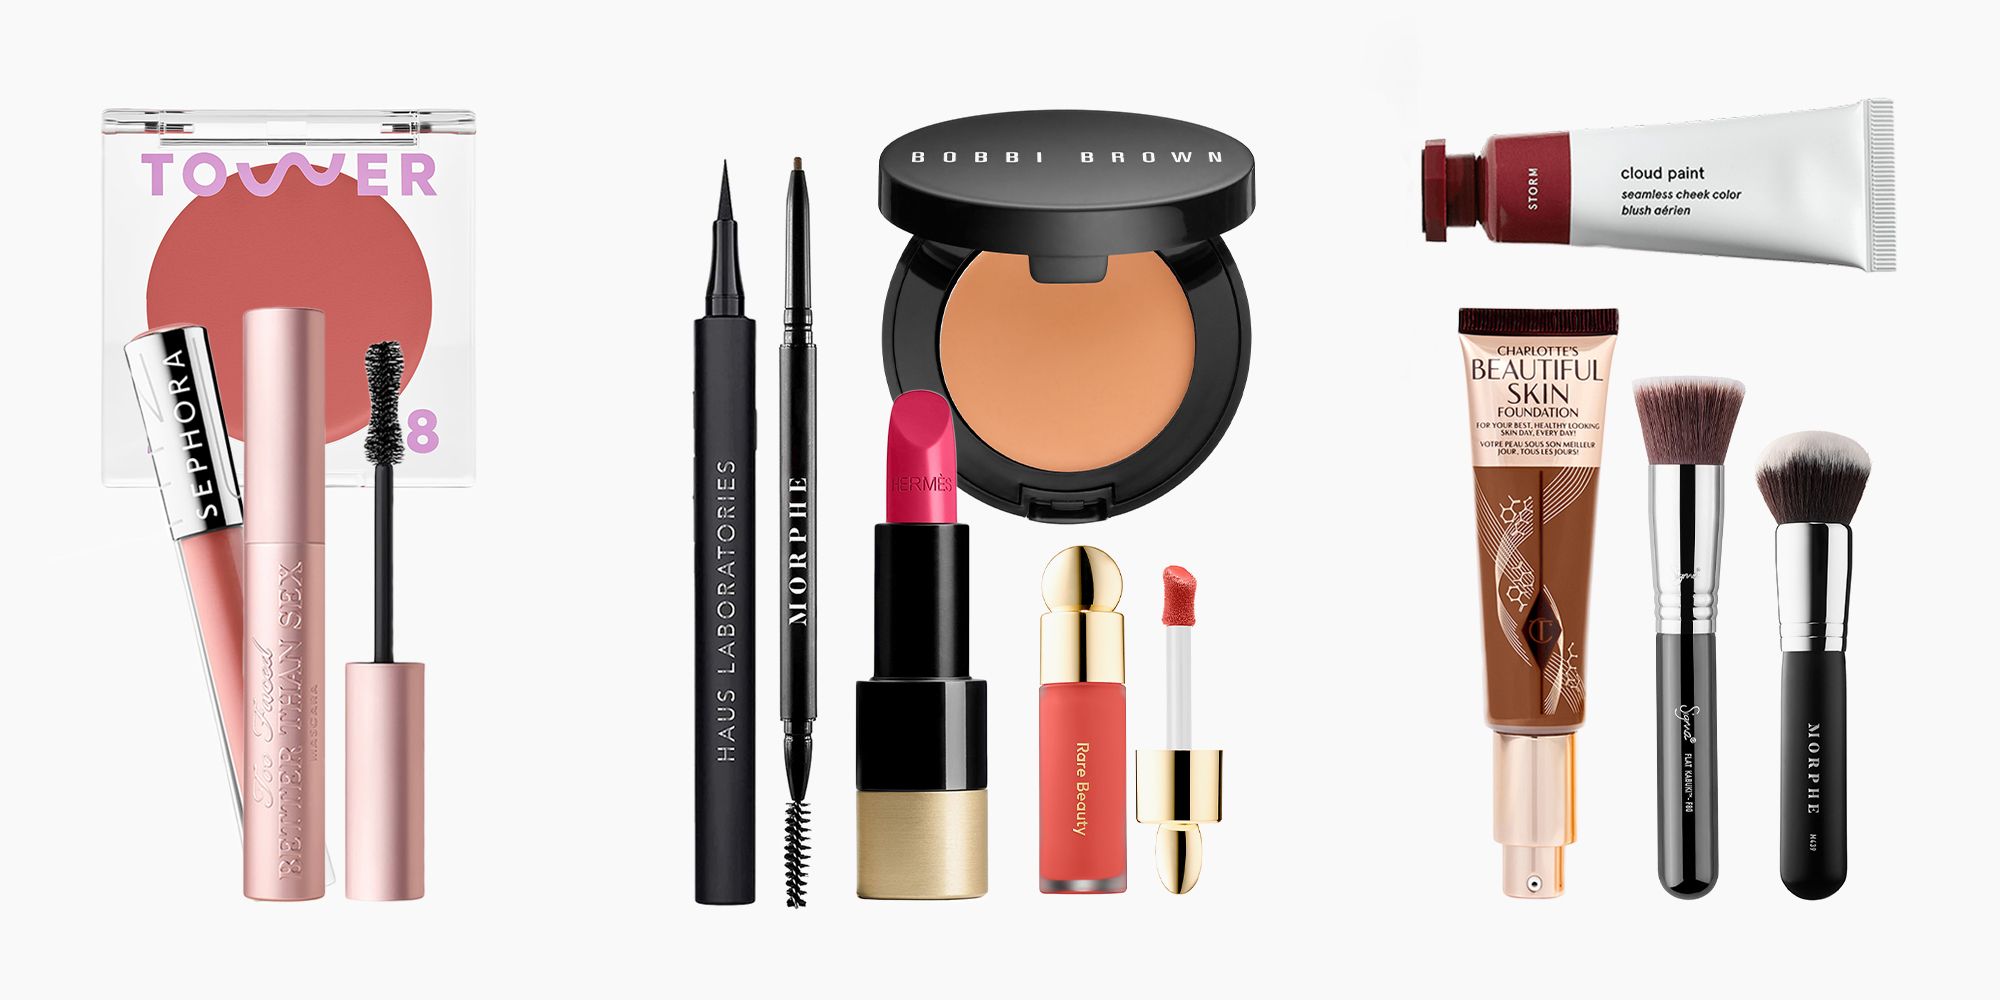 20 Best Makeup Products Ever—Best Makeup Brands and Products 2022